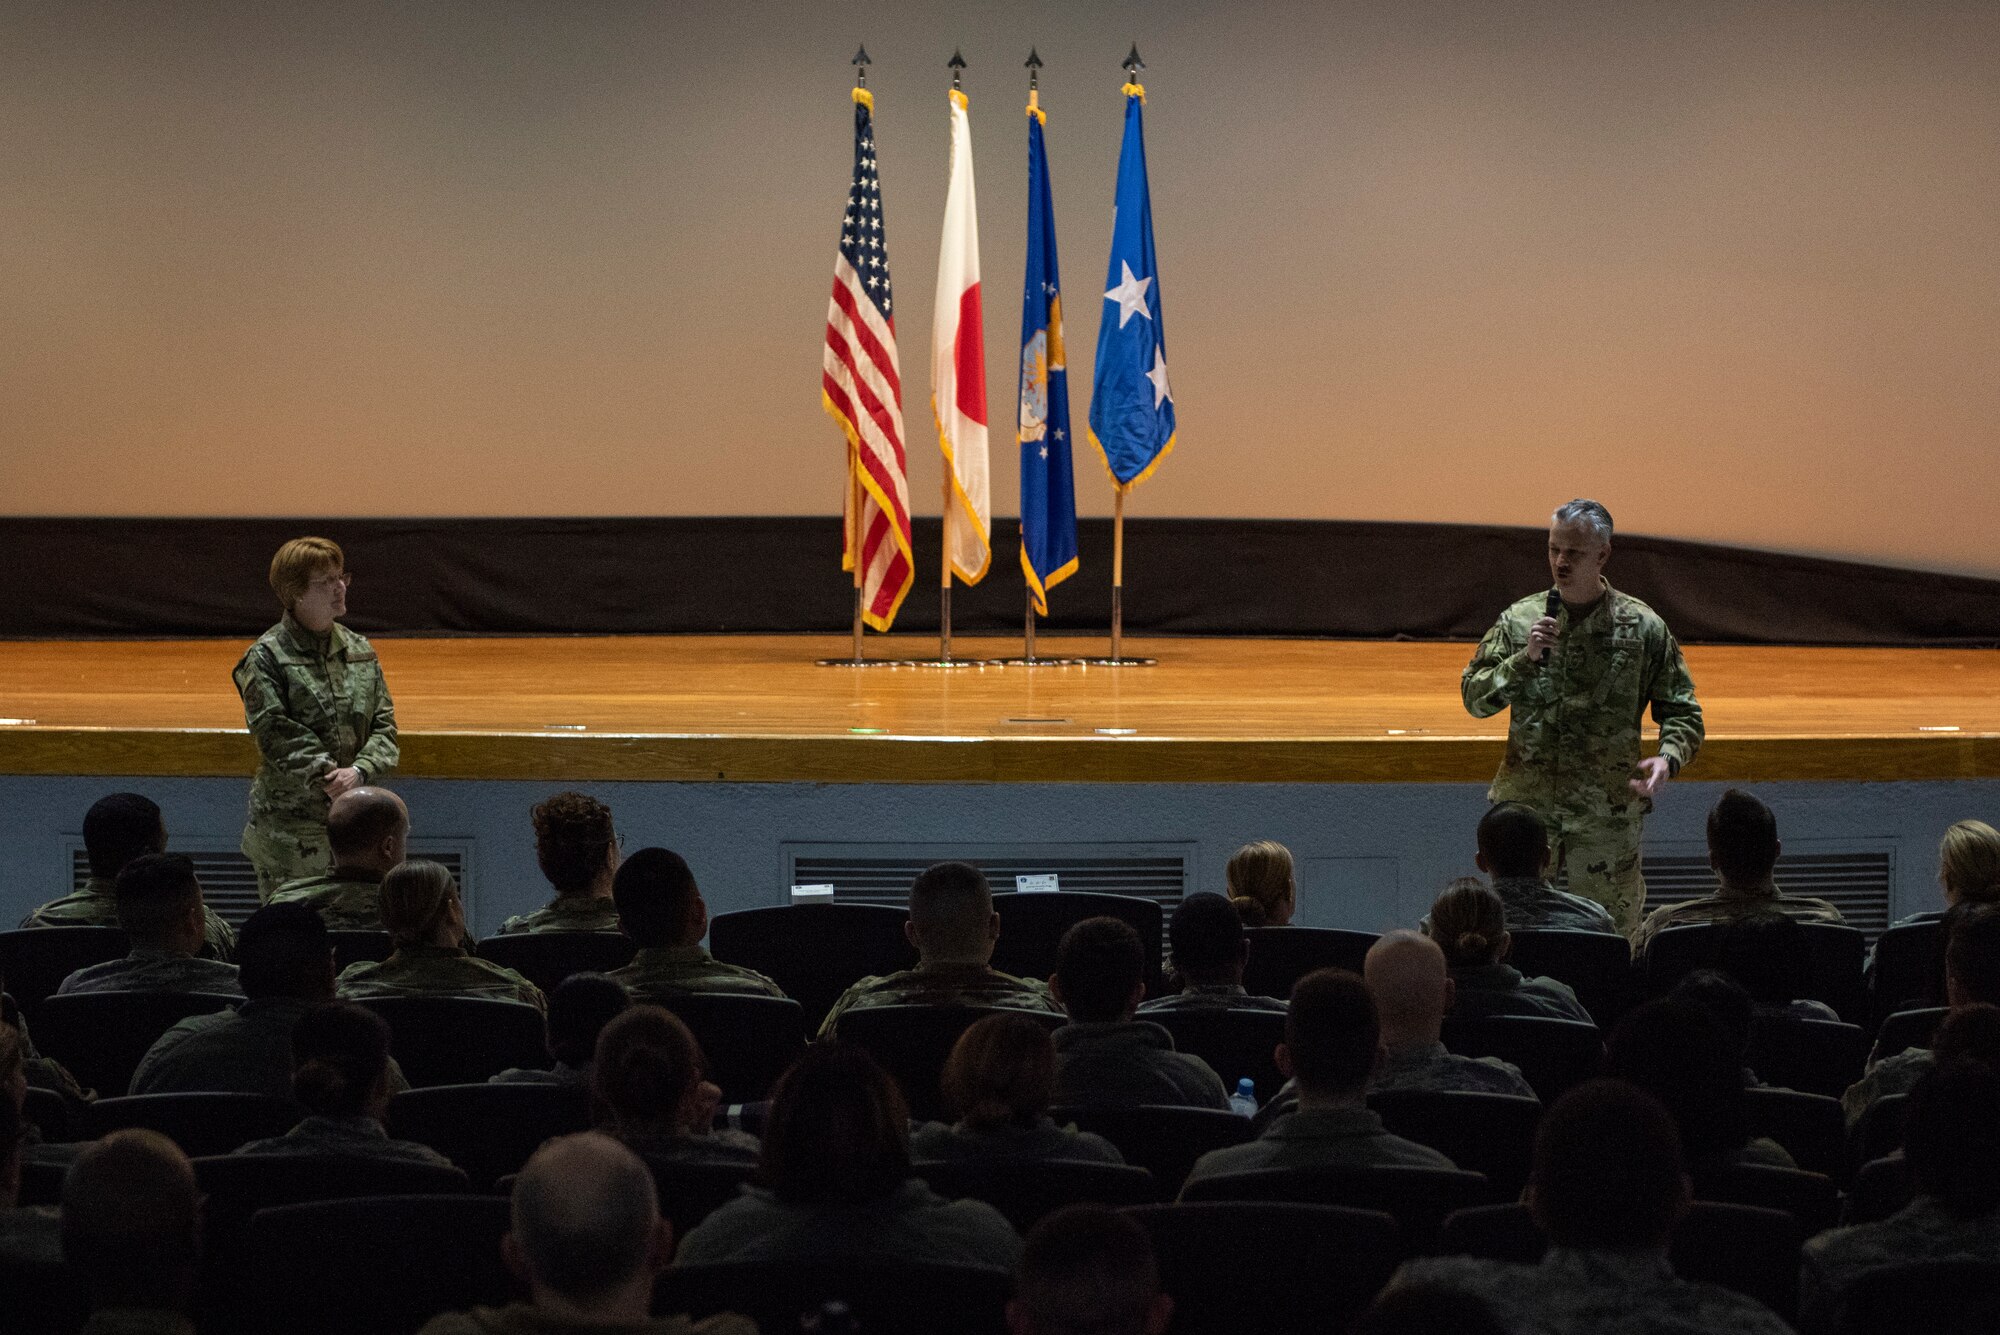 Lt. Gen. Dorothy Hogg, 23rd U.S. Air Force Surgeon General, left, and Chief Master Sgt. G. Steve Cum, Chief of the Medical Enlisted Force, right, speak with the Airmen of the 374th Medical Group during an all call at Yokota Air Base, Japan, Jan. 29, 2019.